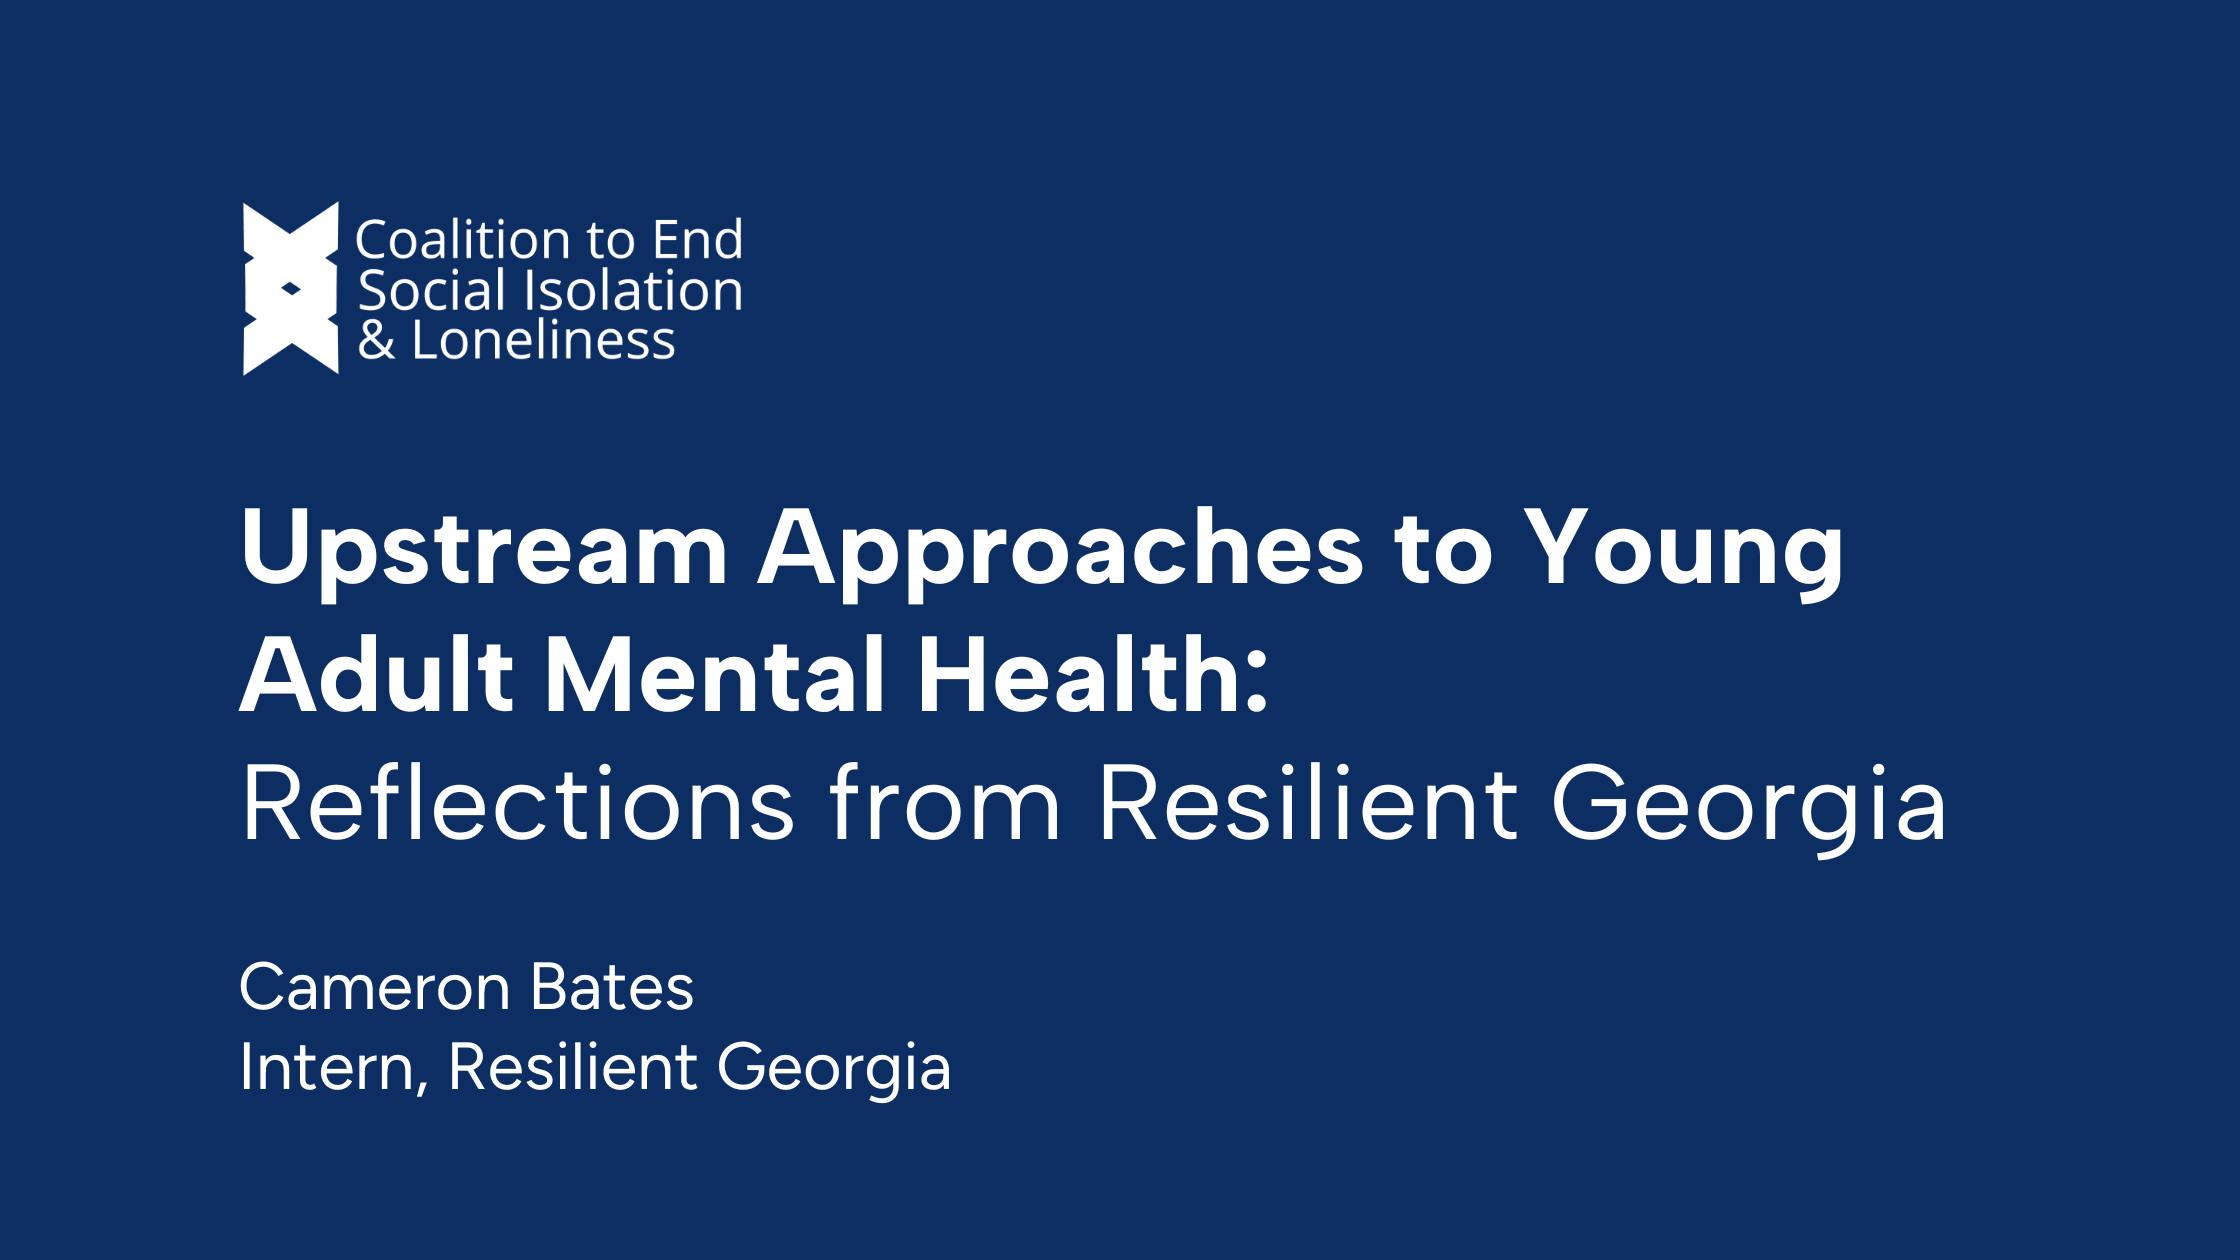 Upstream Approaches to Young Adult Mental Health: Reflections from Resilient Georgia